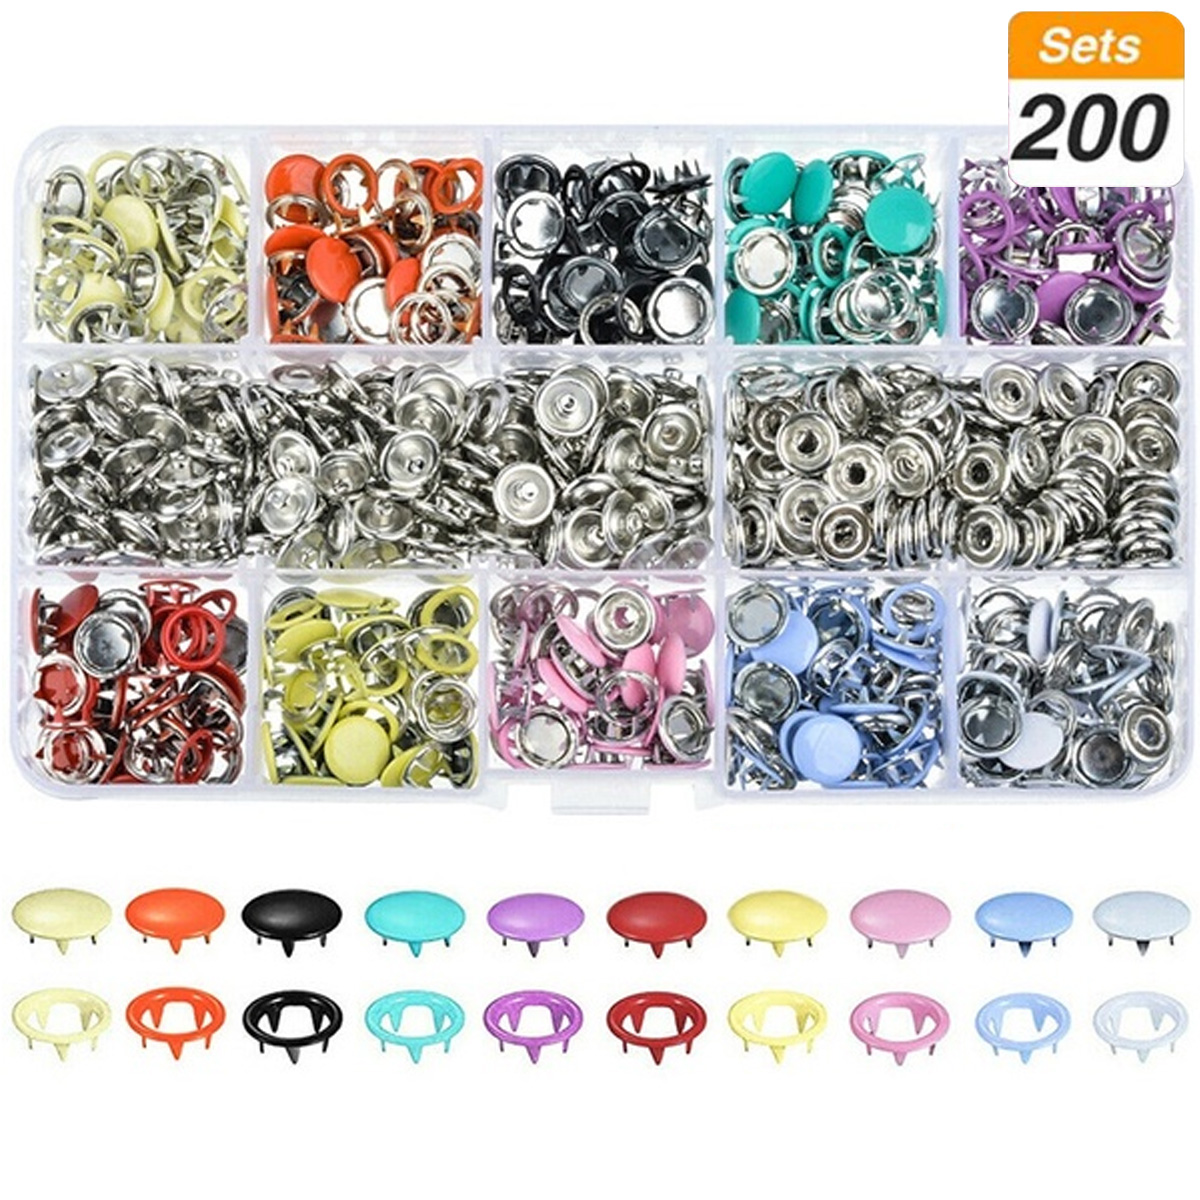 100200-Sets-DIY-Press-Studs-Tools-Kit-Assorted-Colors-Snap-Metal-Sewing-Buttons-1618875-2